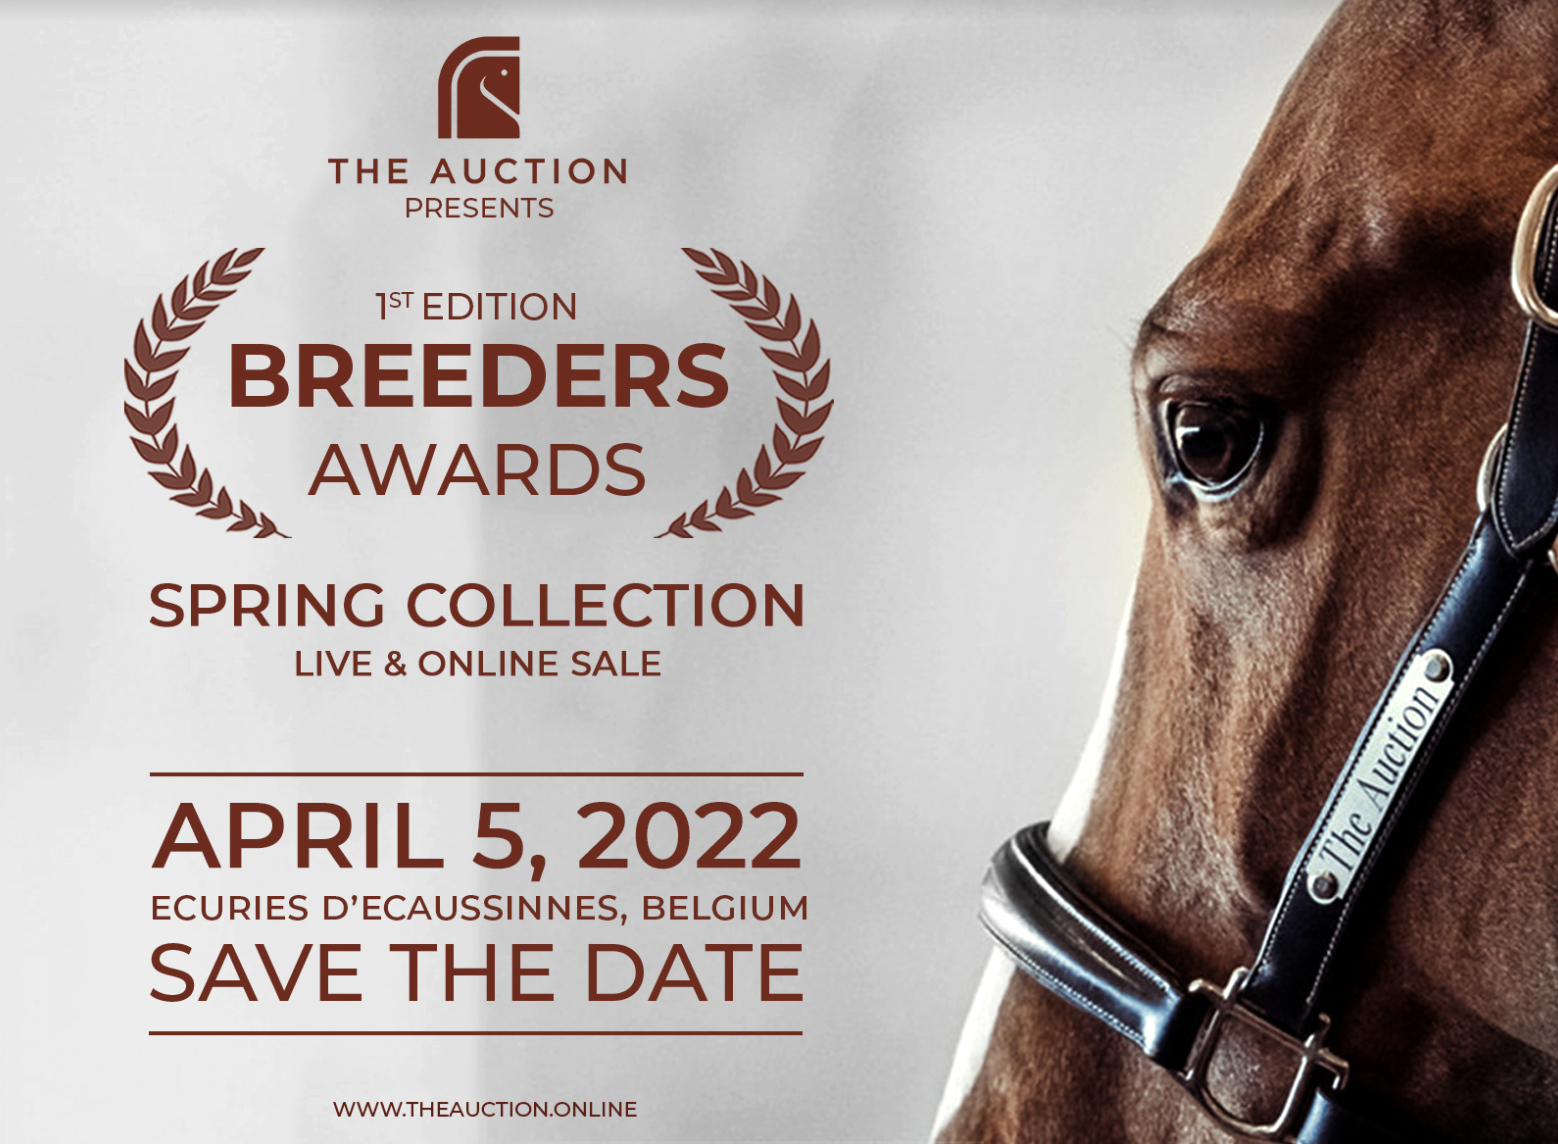 The Auction announces the creation of the first “Breeders Awards” presented at the upcoming “spring collection”